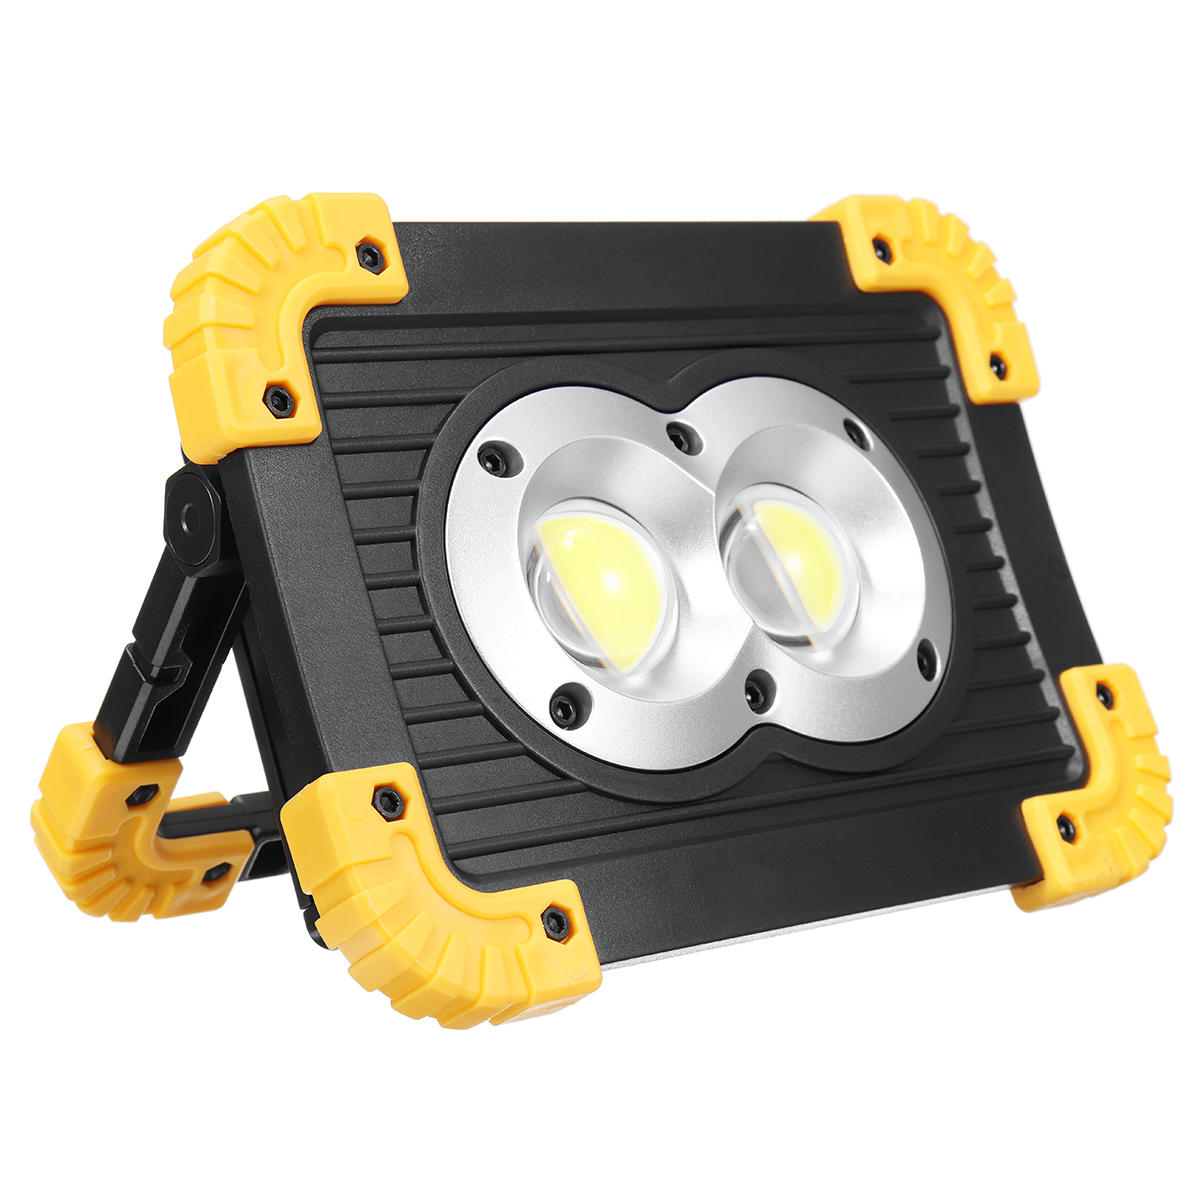 Super Bright COB LED Work Light Outdoor Camping Floodlight Emergency Lamp Stand 